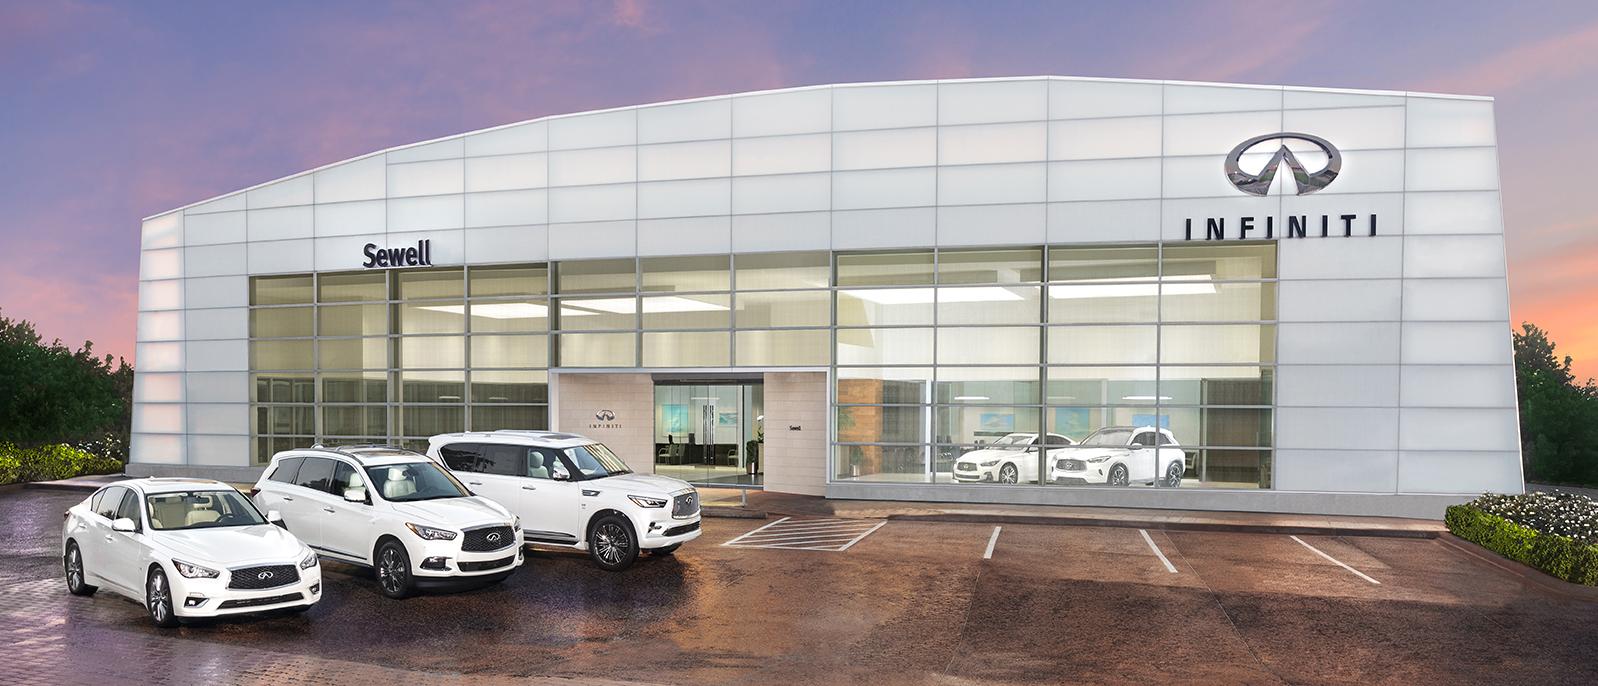 Sewell INFINITI of Fort Worth Exterior